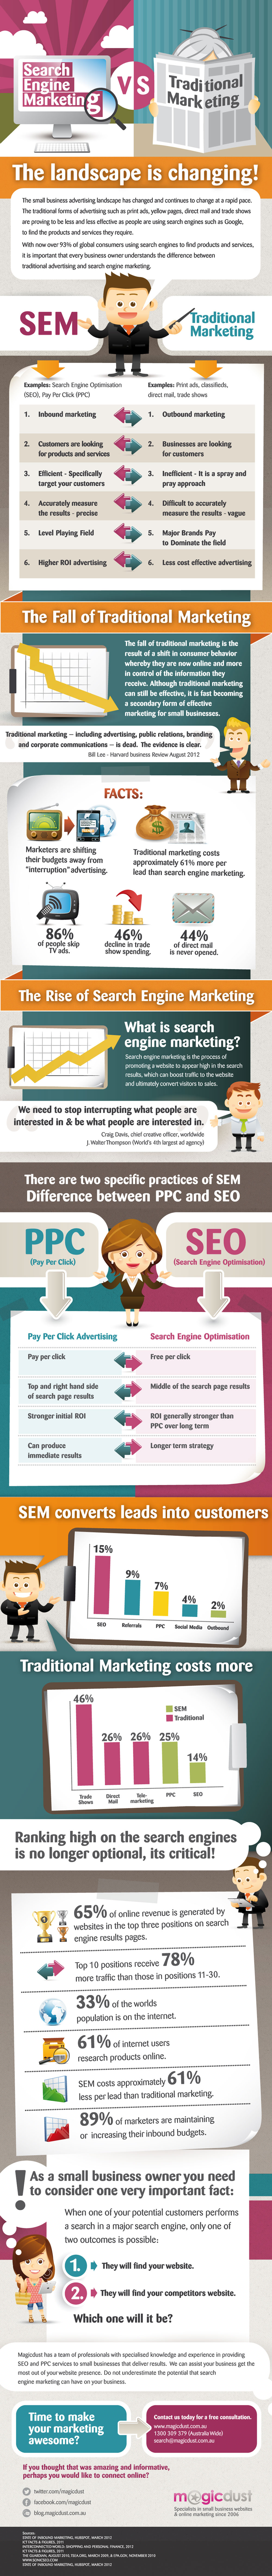 Search Engine Marketing versus traditional marketing